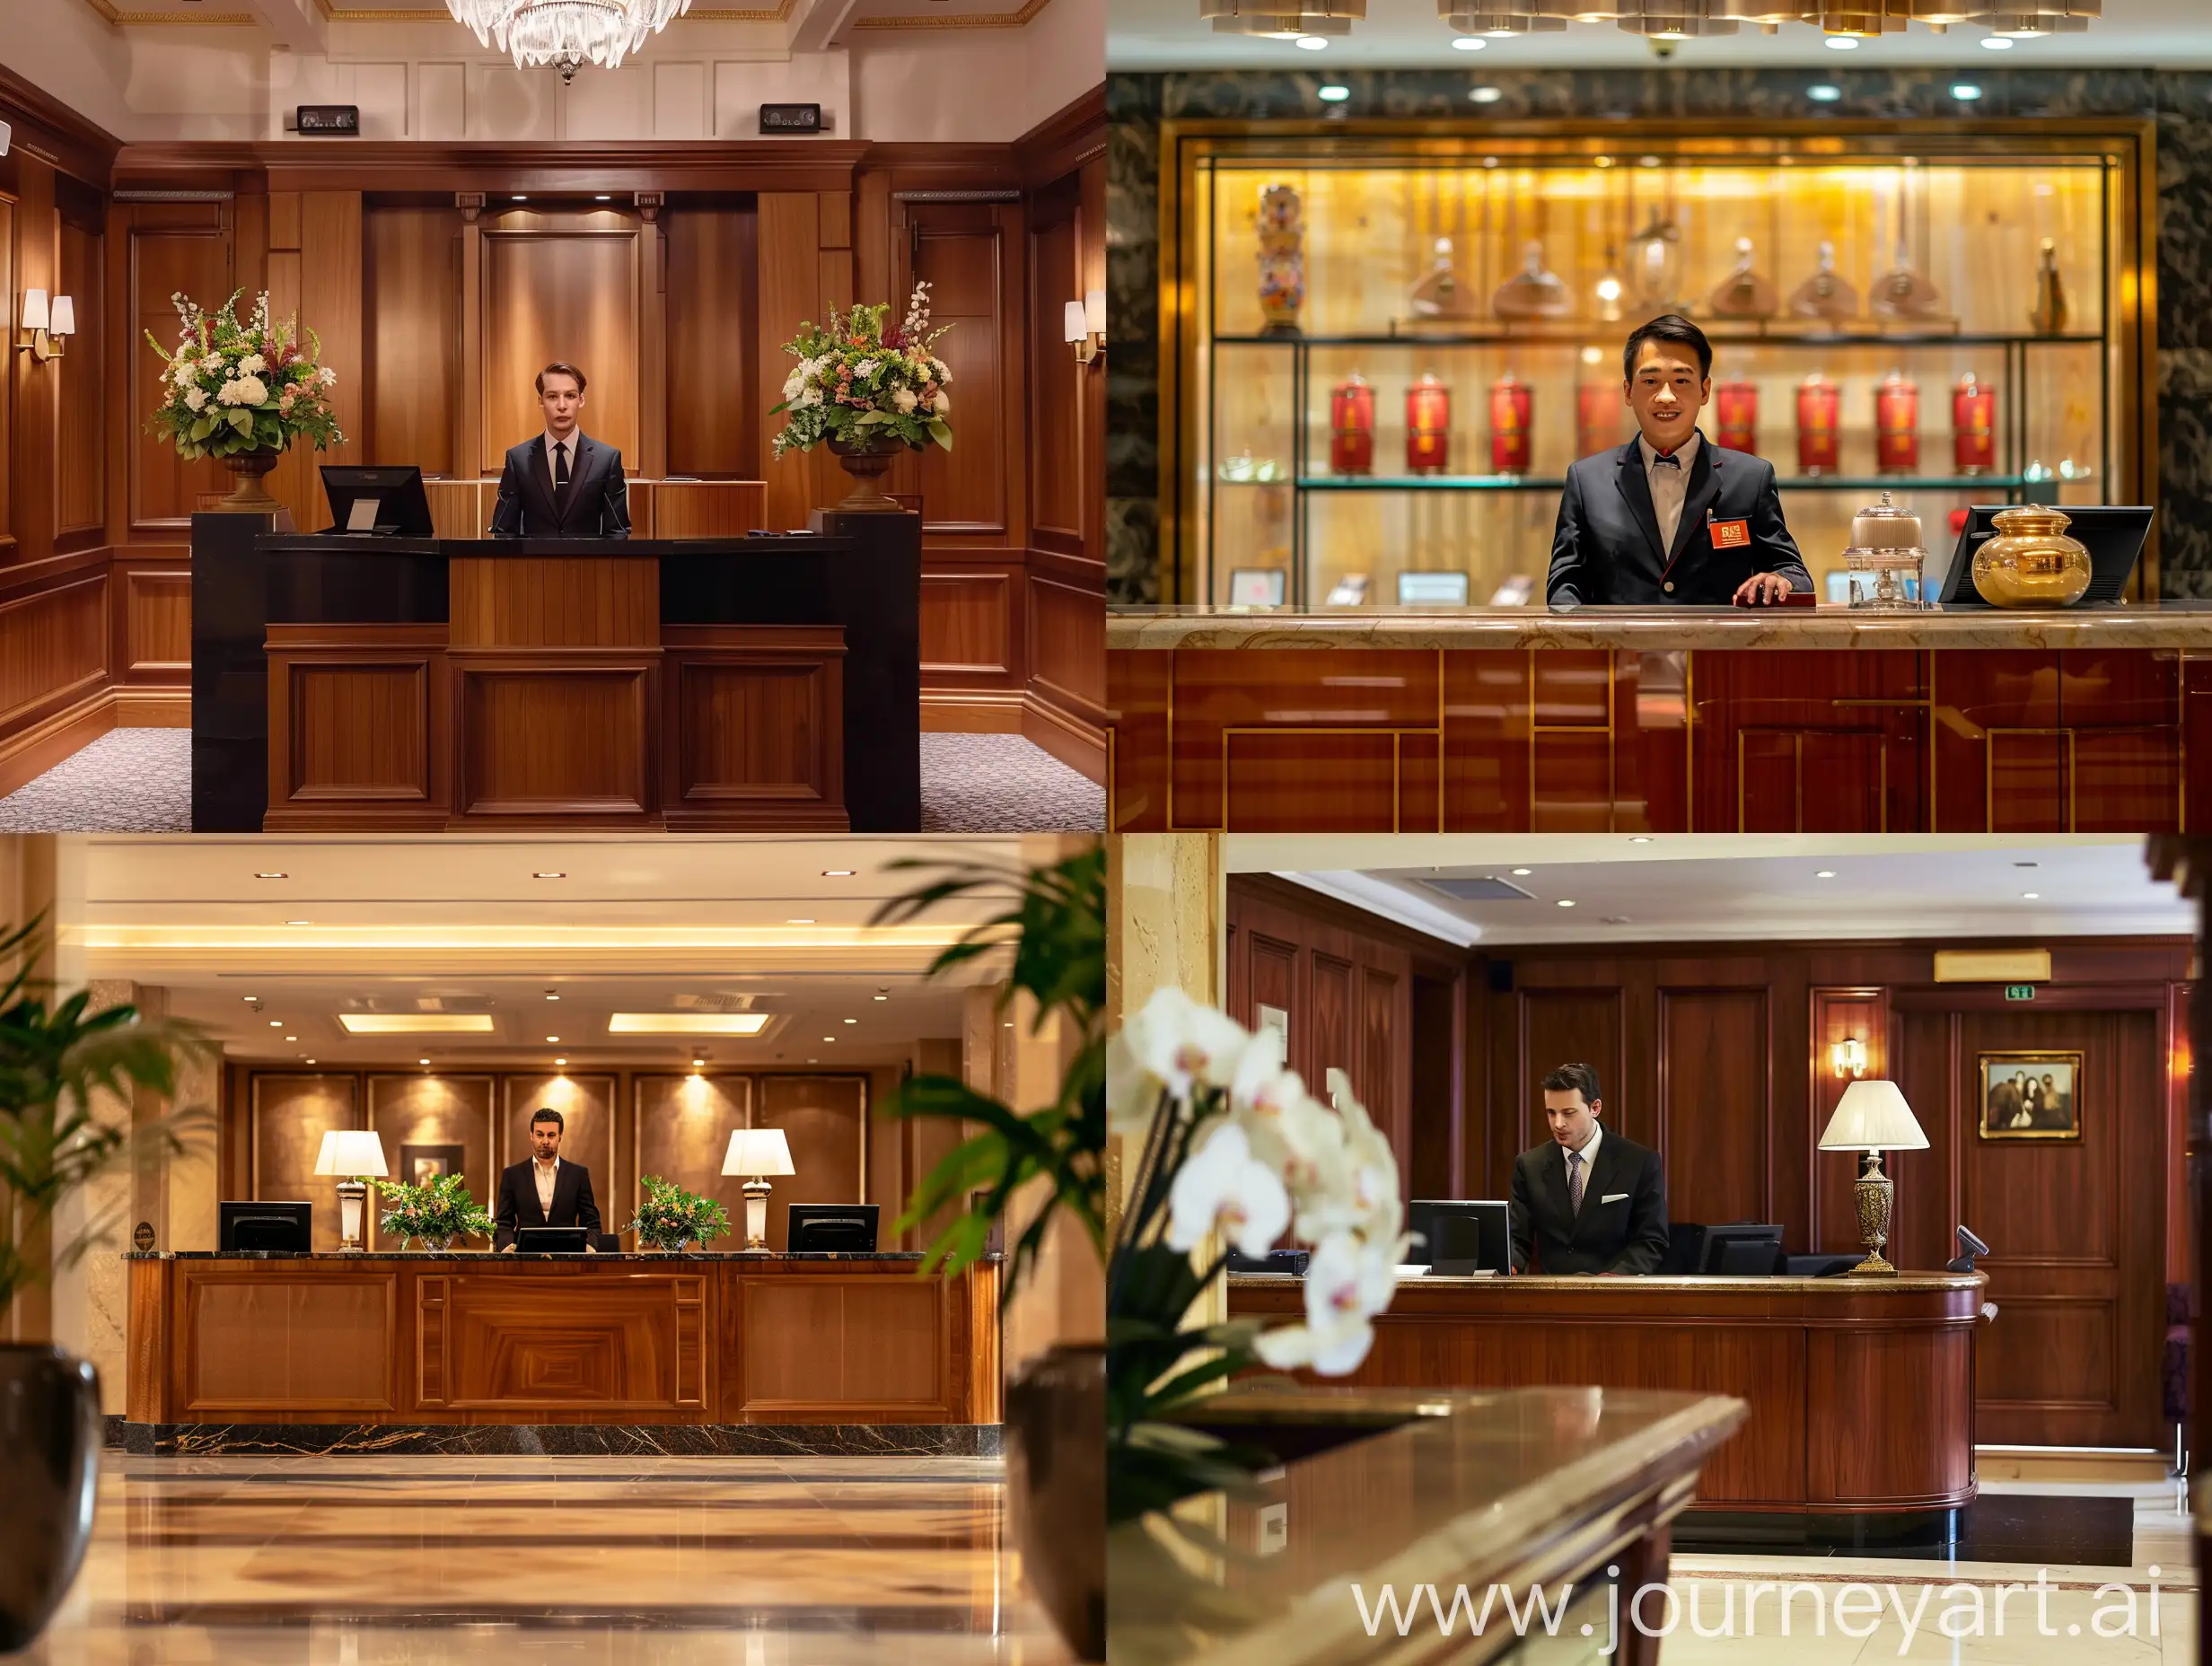 Hotel-Receptionist-at-Front-Desk-in-Vibrant-Setting